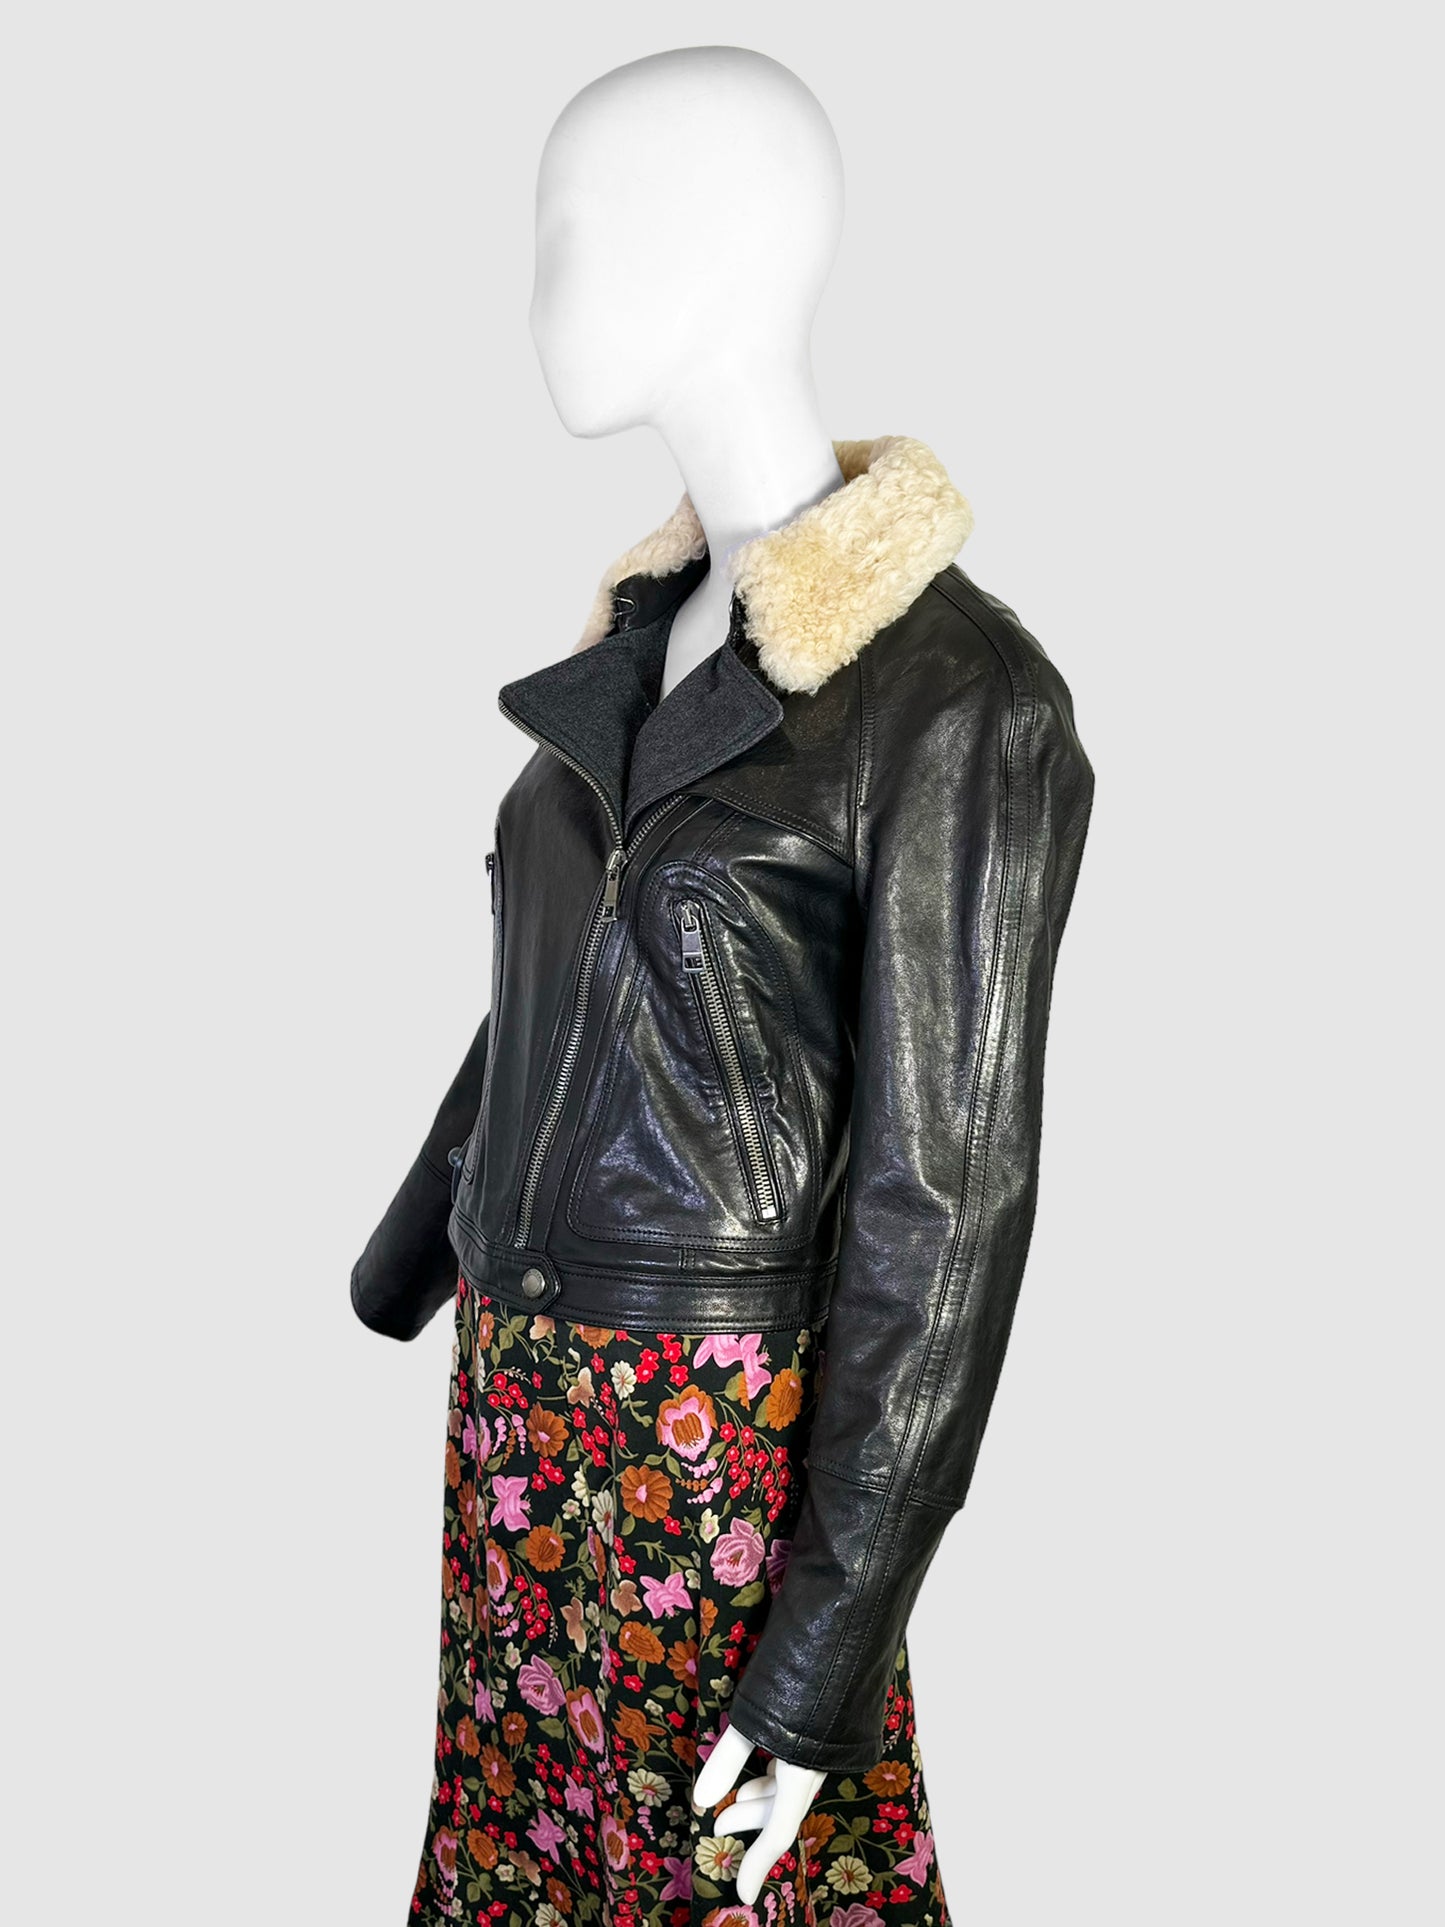 Burberry Leather Jacket with Shearling Collar - Size 8